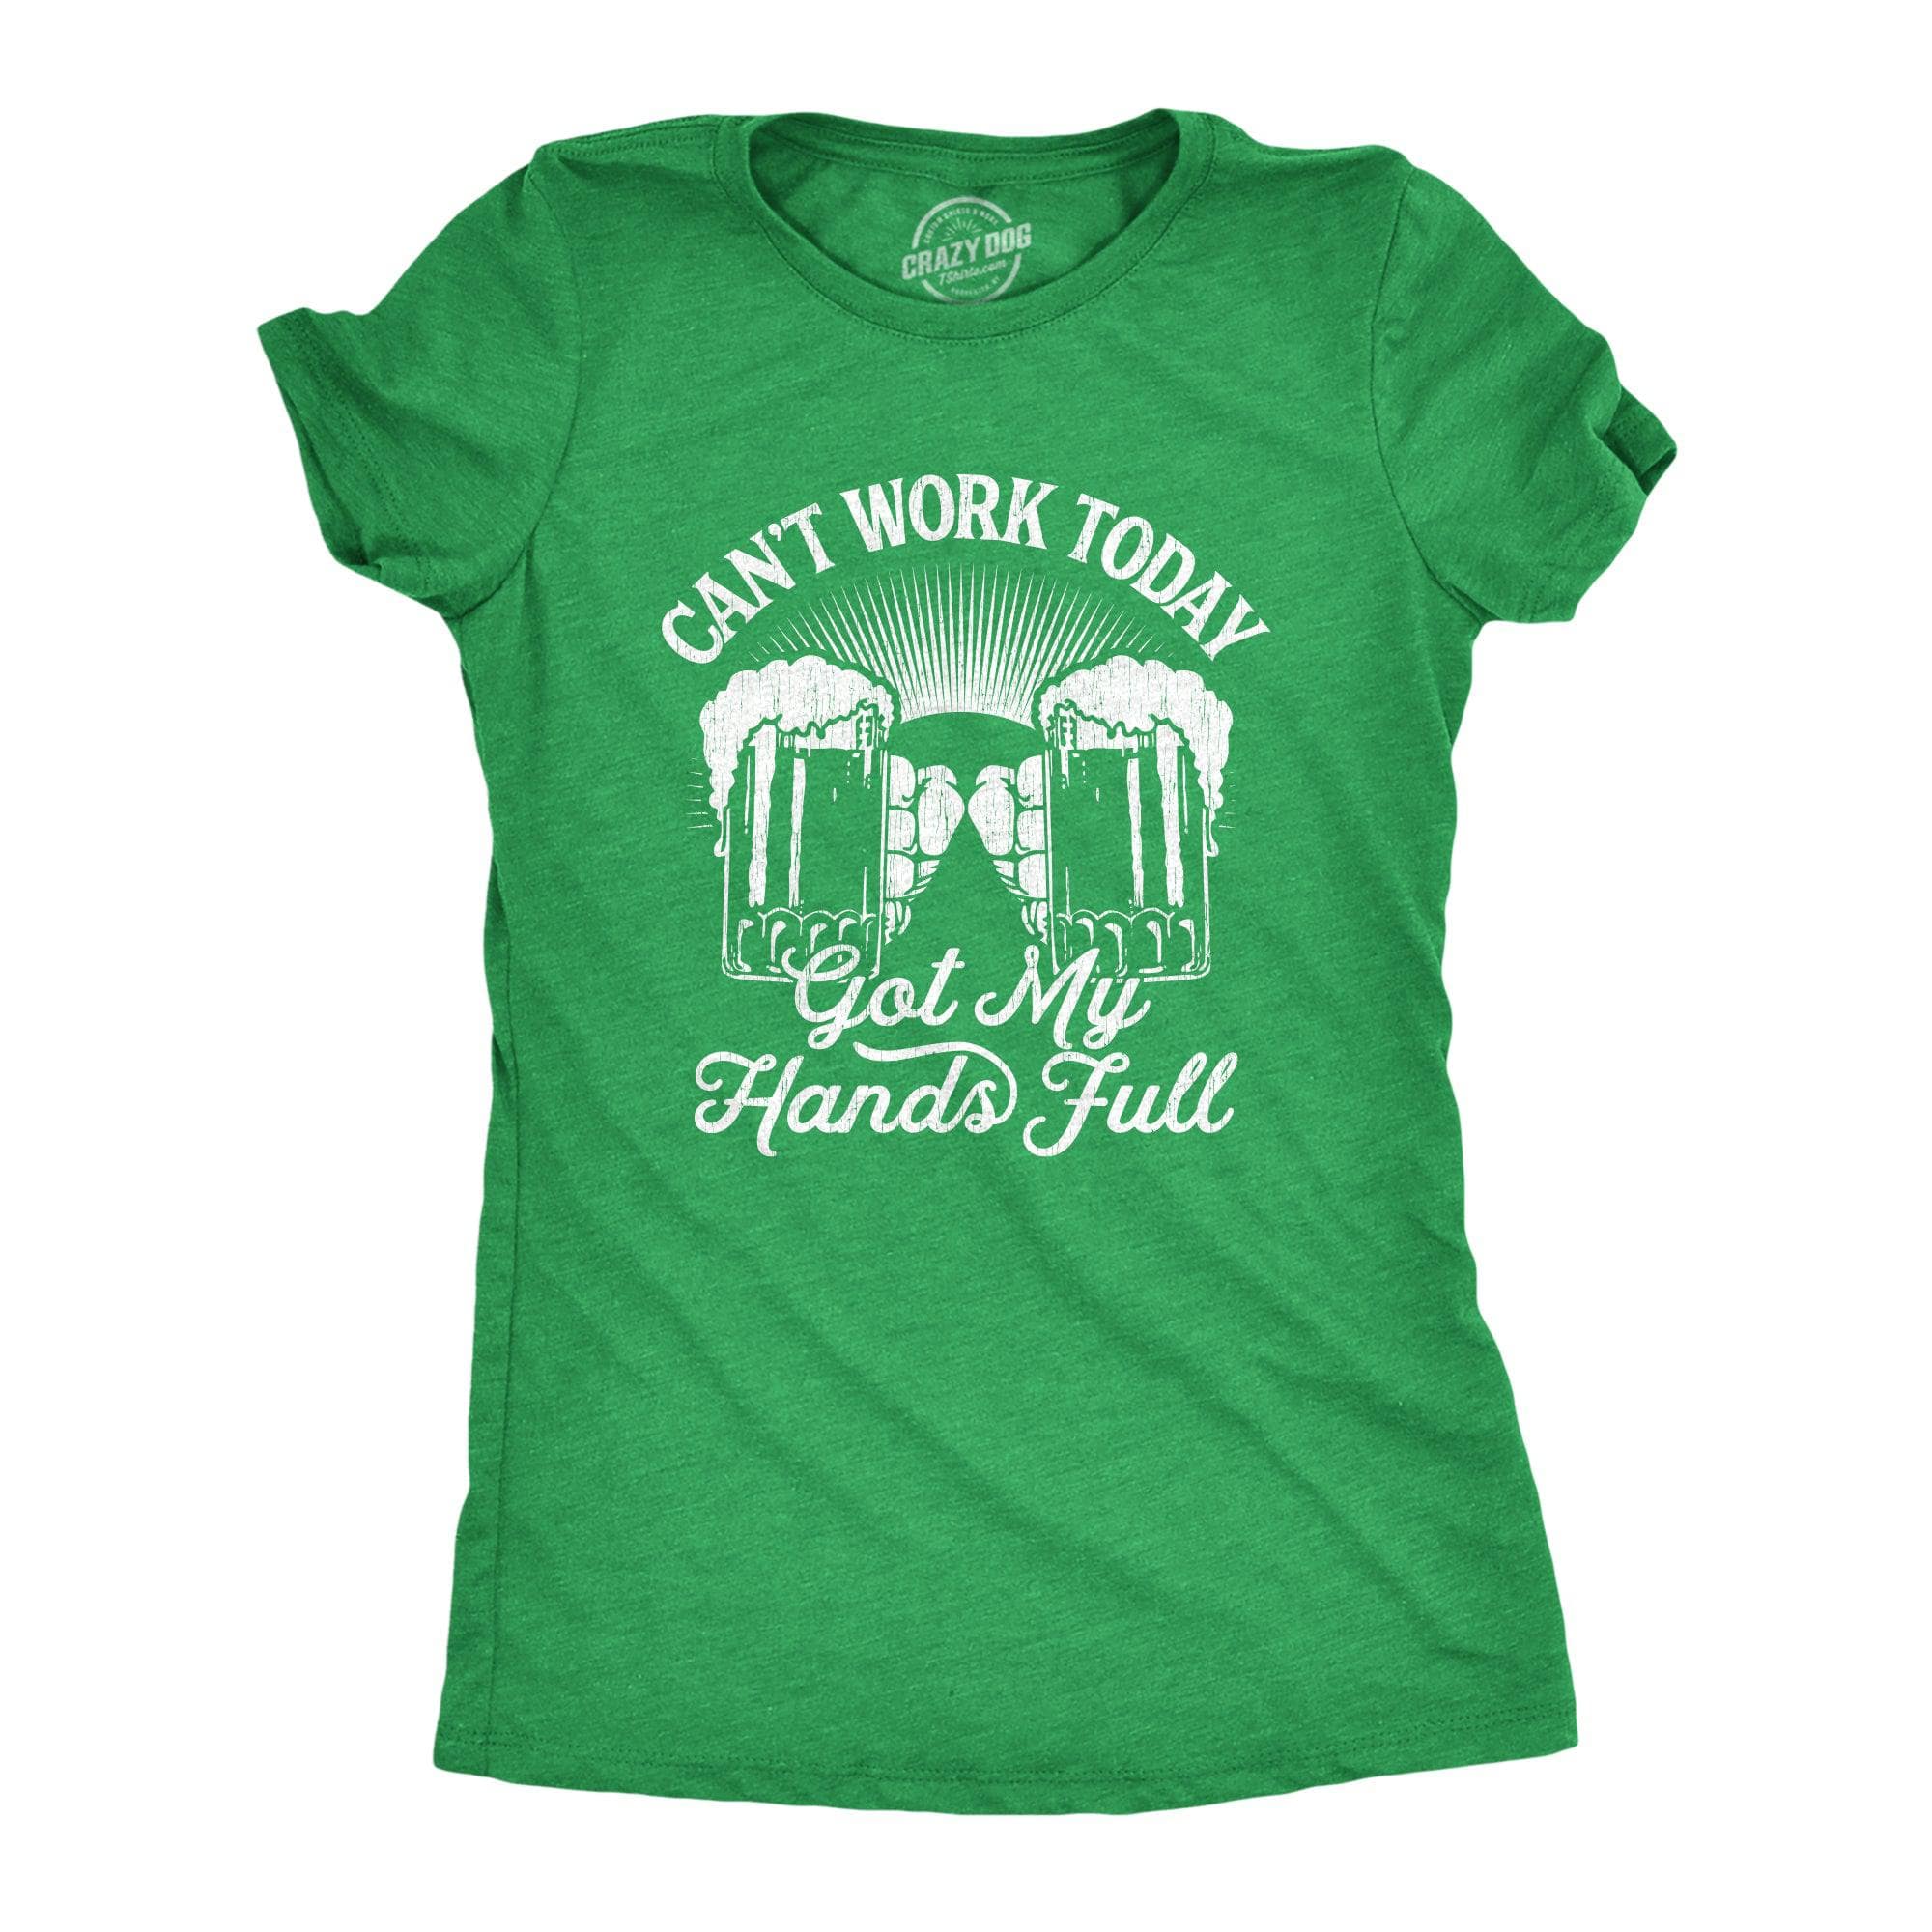 Can't Work Today Got My Hands Full Women's Tshirt  -  Crazy Dog T-Shirts